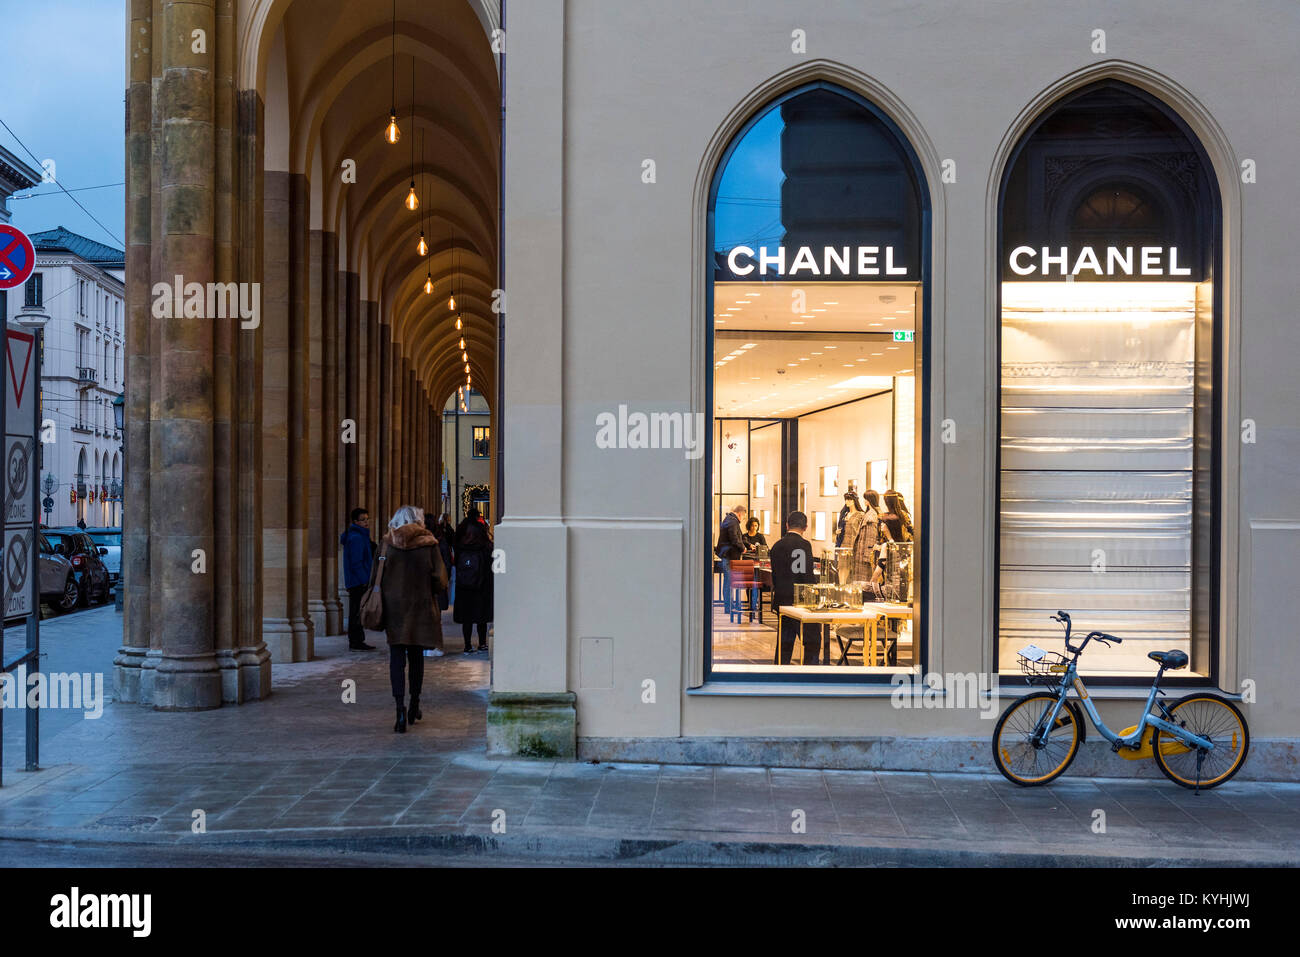 Chanel Shop at München, Germany Stock Photo - Alamy